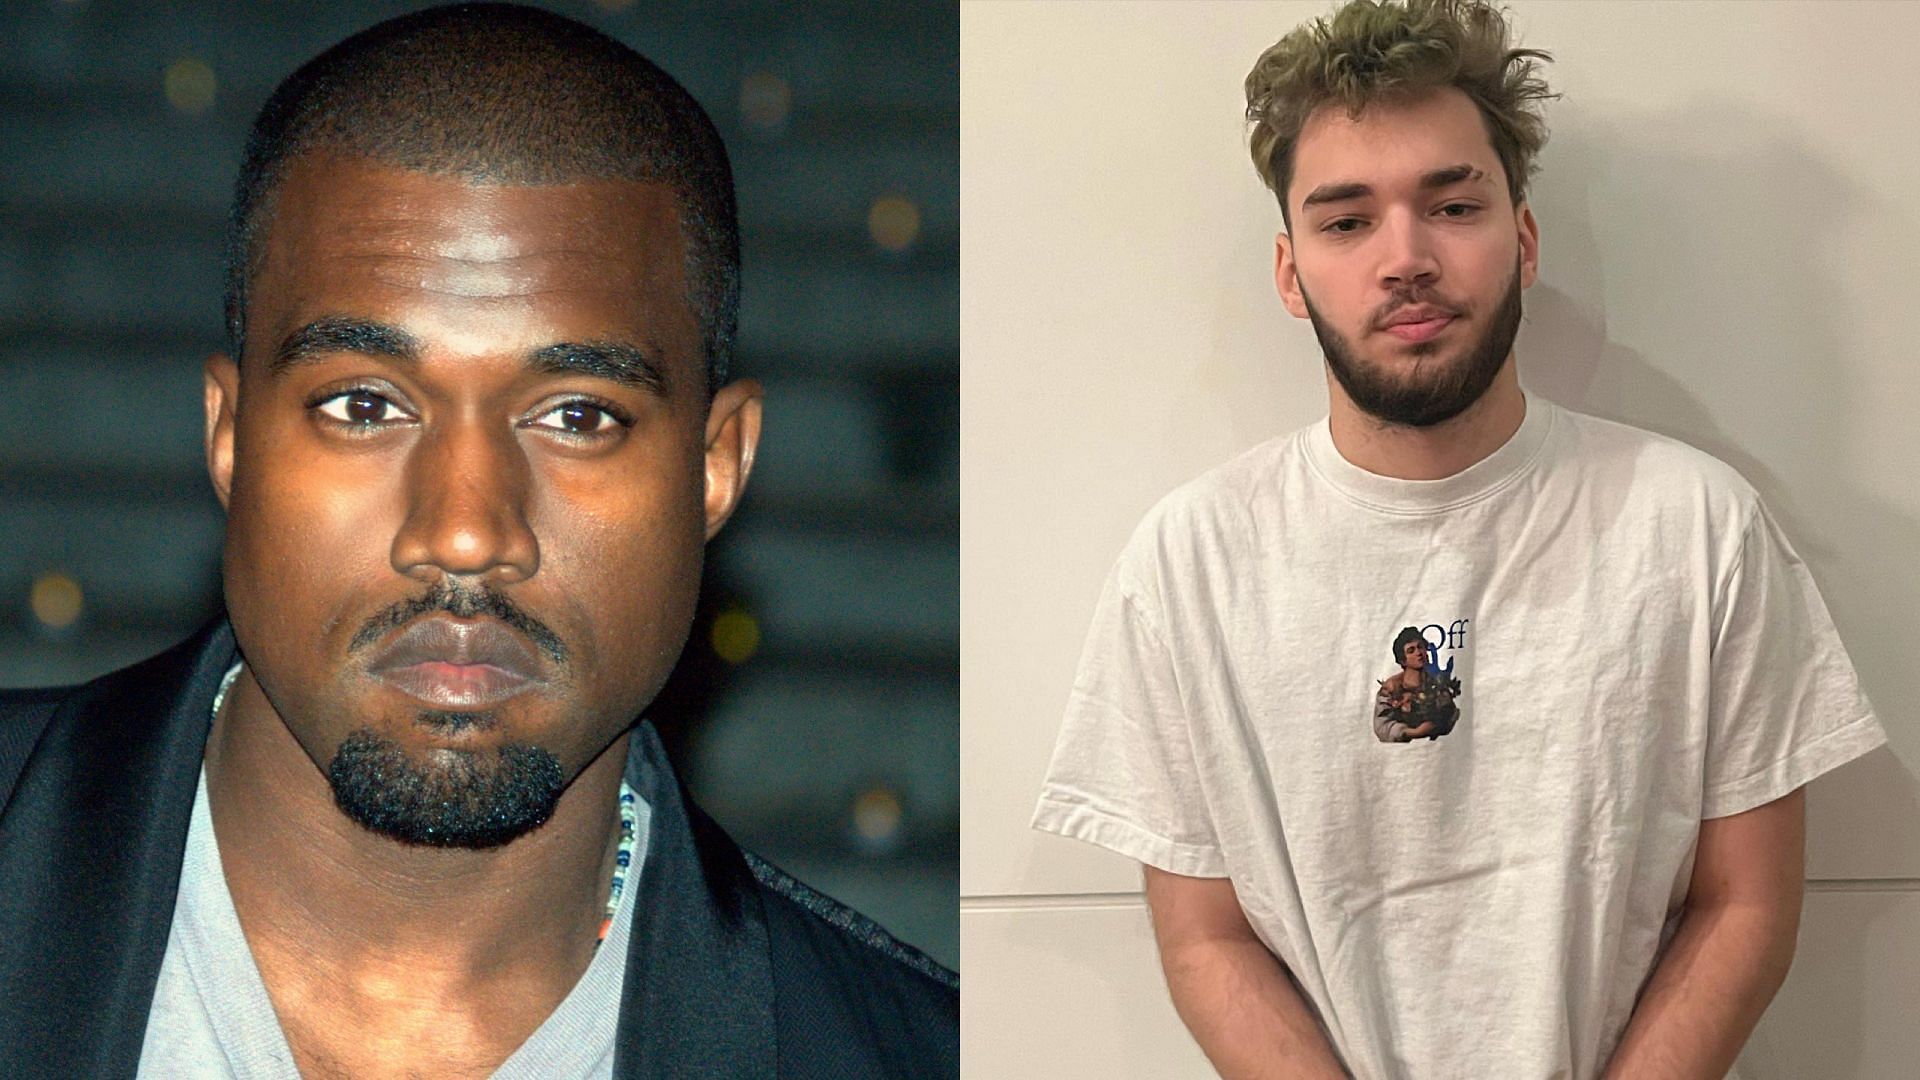 Adin Ross mentioned by Kanye West in recent interview (Image via David Shankbone, Adin Ross/Instagram)